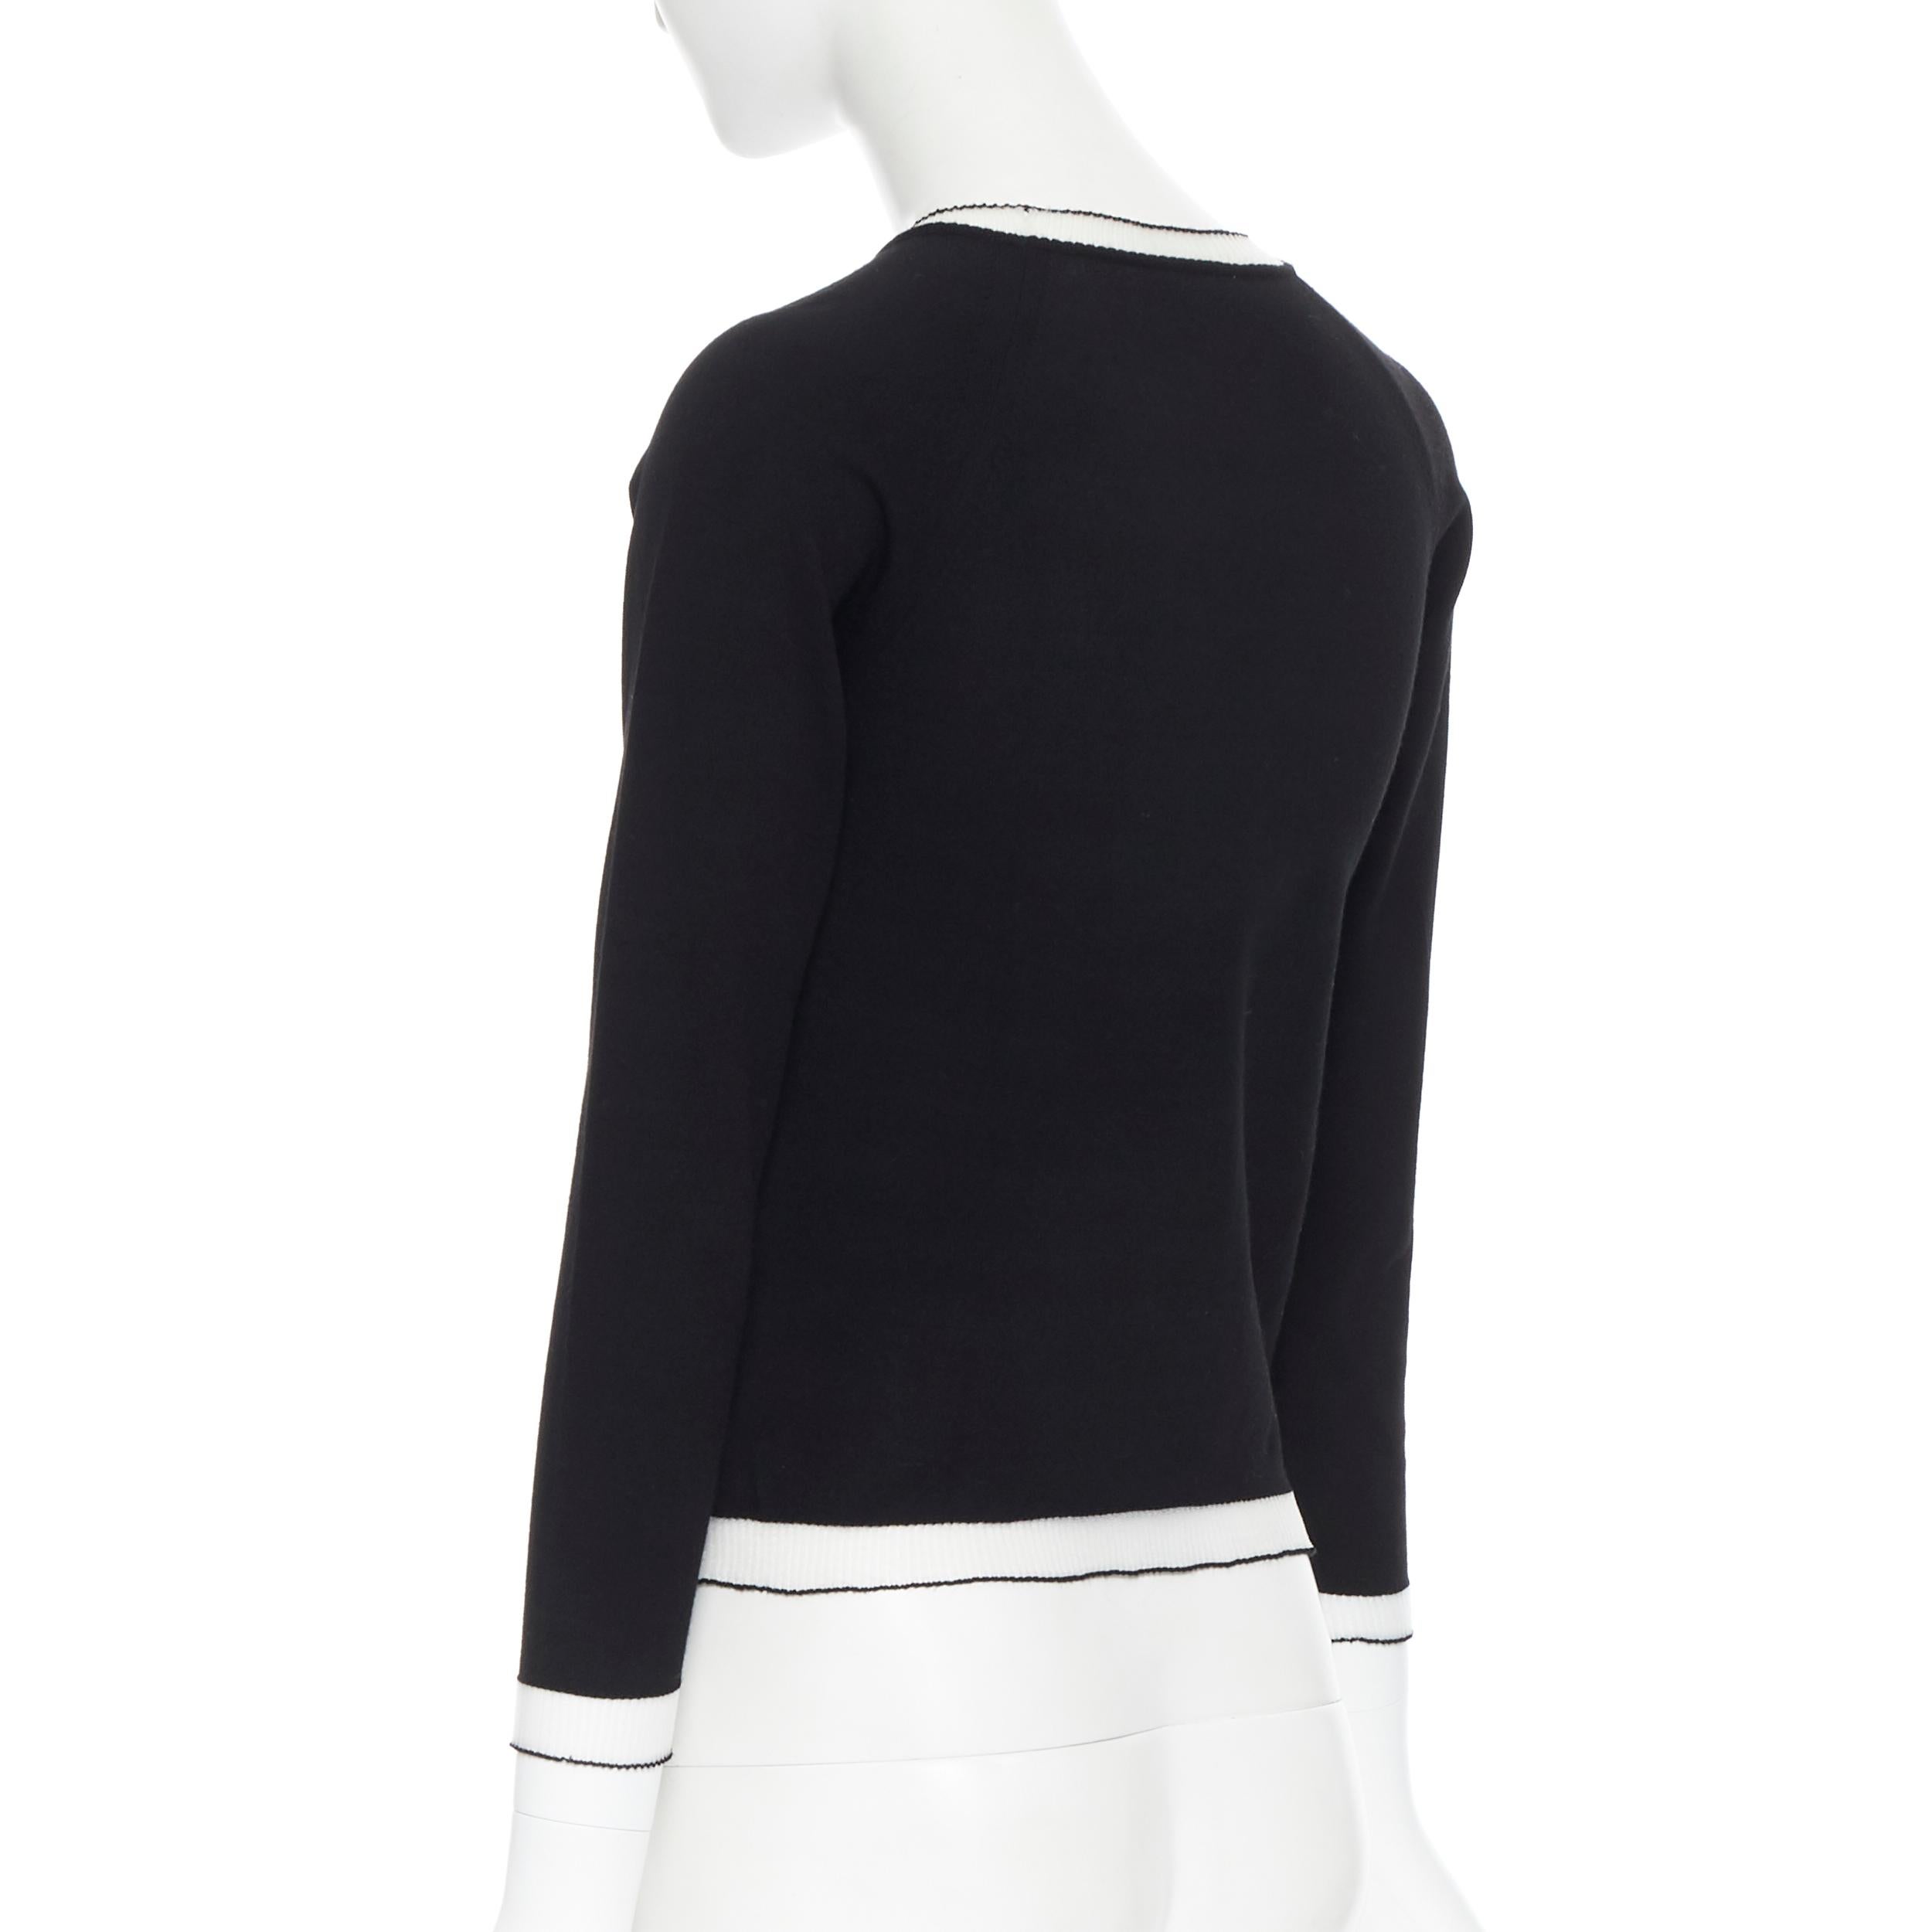 TOMAS MAIER black viscose polyester knit white sheer ribbed sweater top XS 1